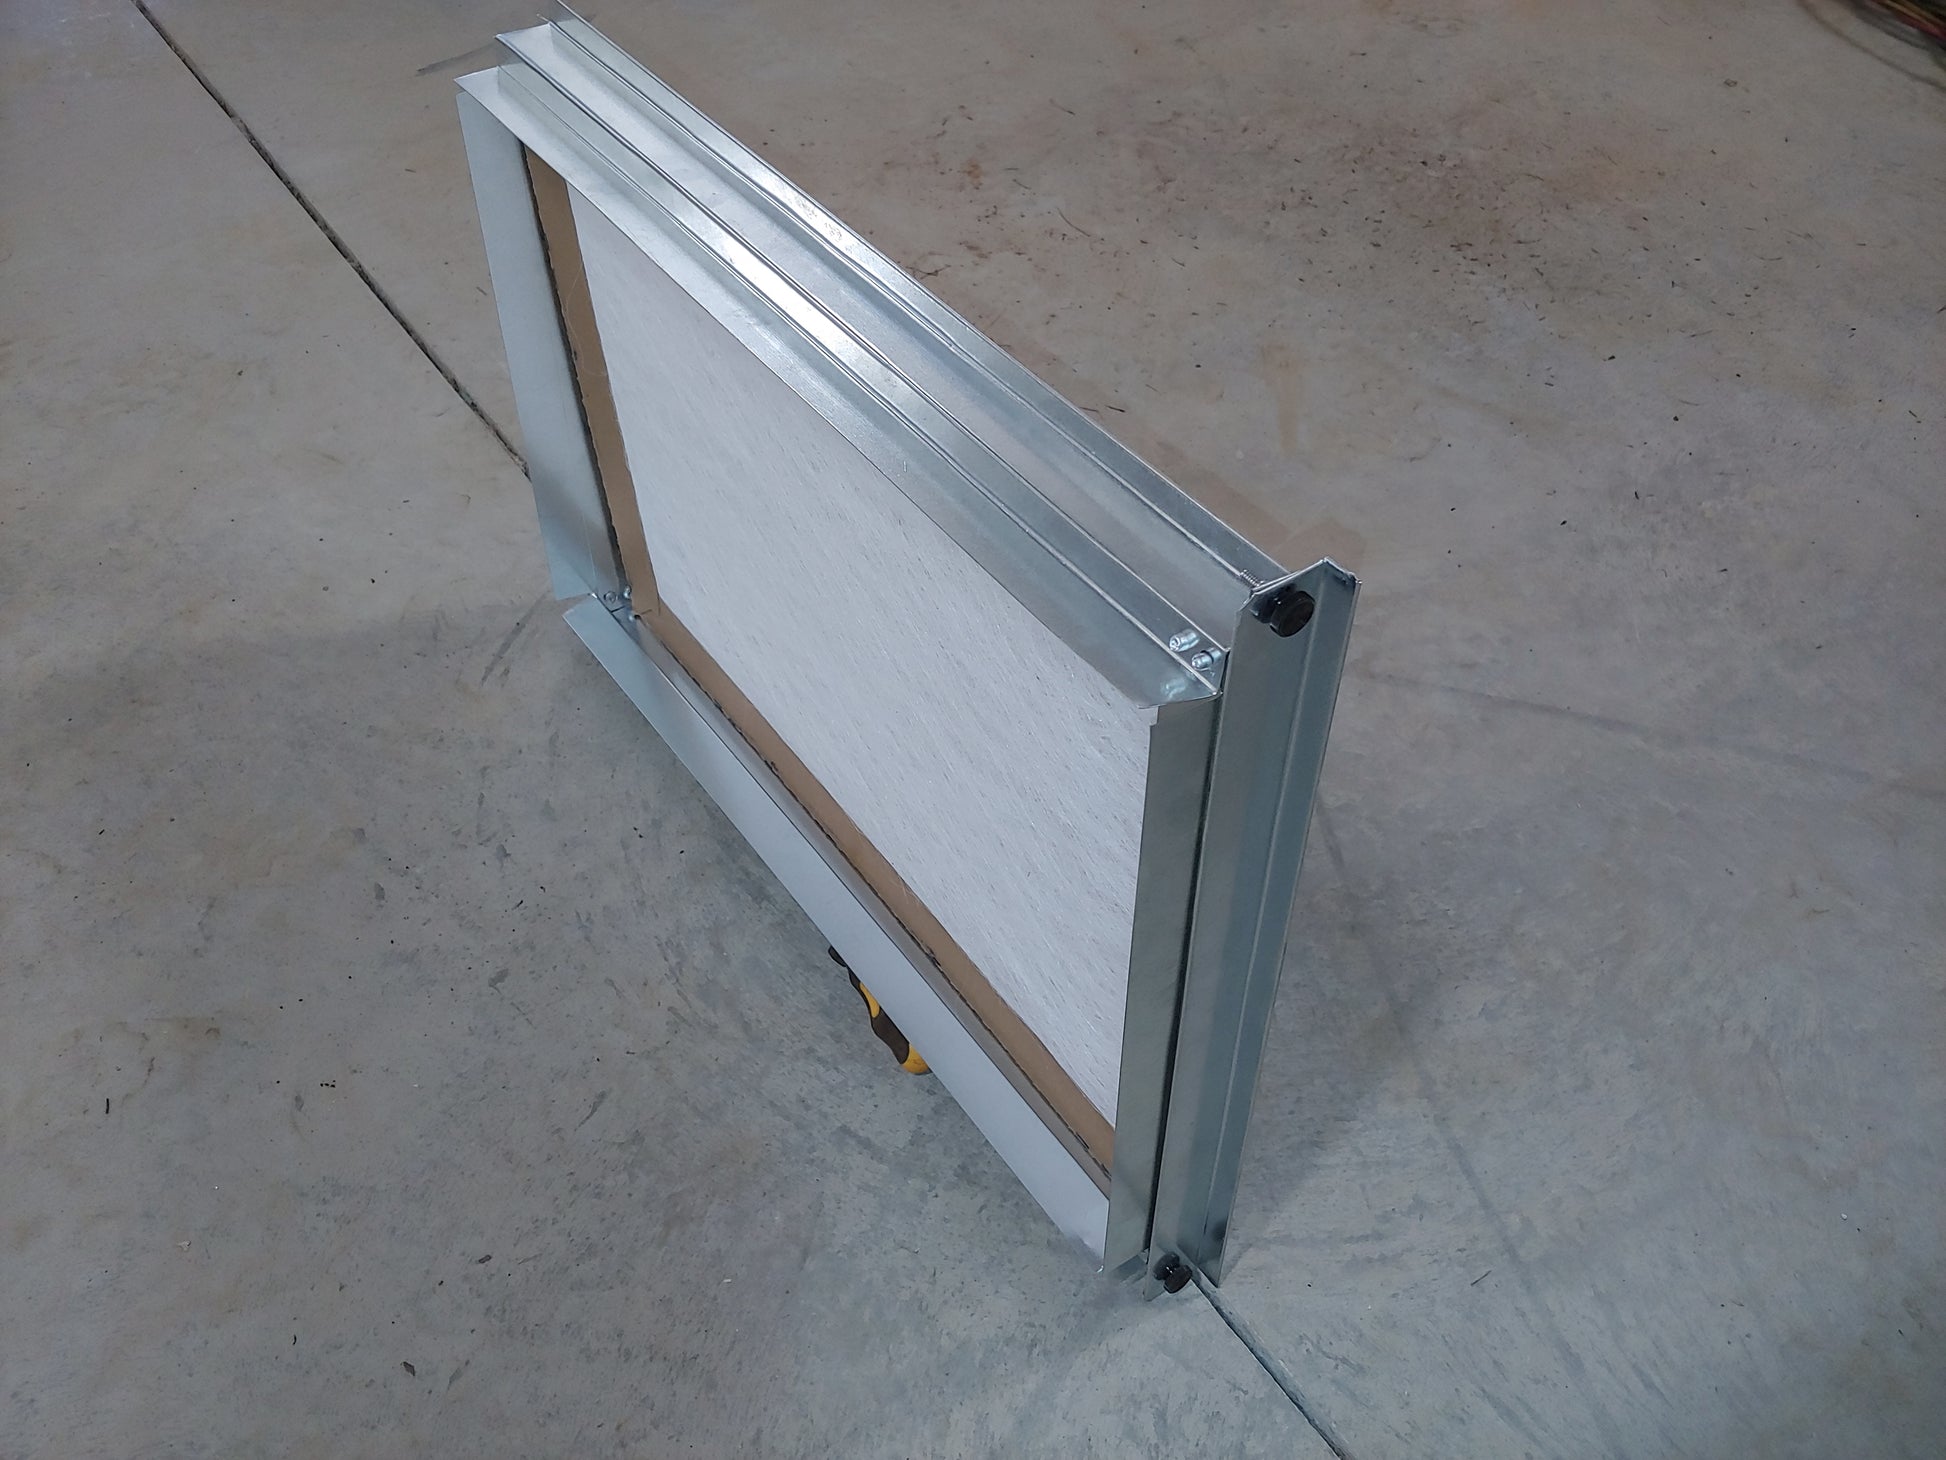 1" Universal Filter Rack Available In-16"X25"X1"/ -16"X24"X1" / -16"X20"X1" -14"X25"X1" / -14"X24"X1" / -14"X20"X1"/ -12"X24"X1" / -12"X20"X1" With Filter Installed